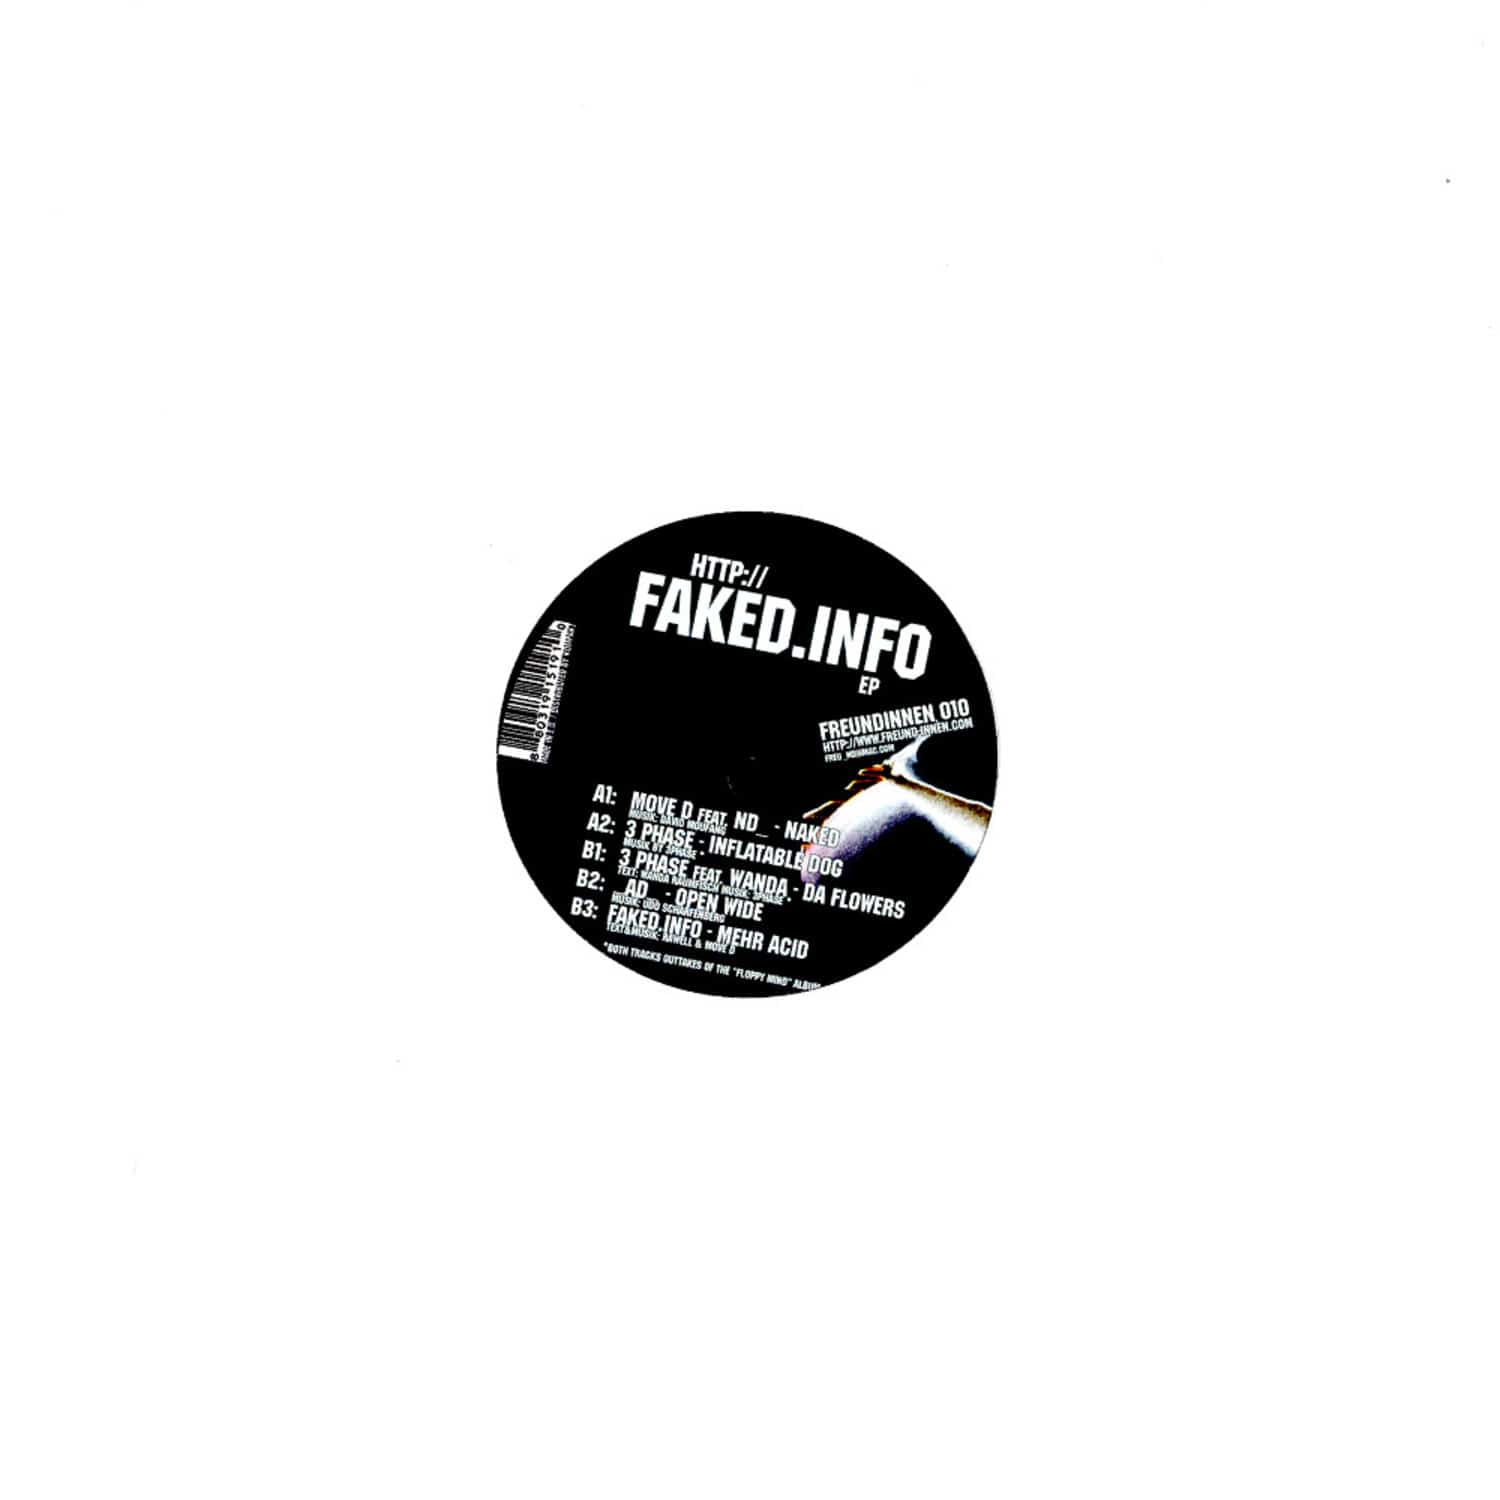 V/A - FAKED.INFO EP